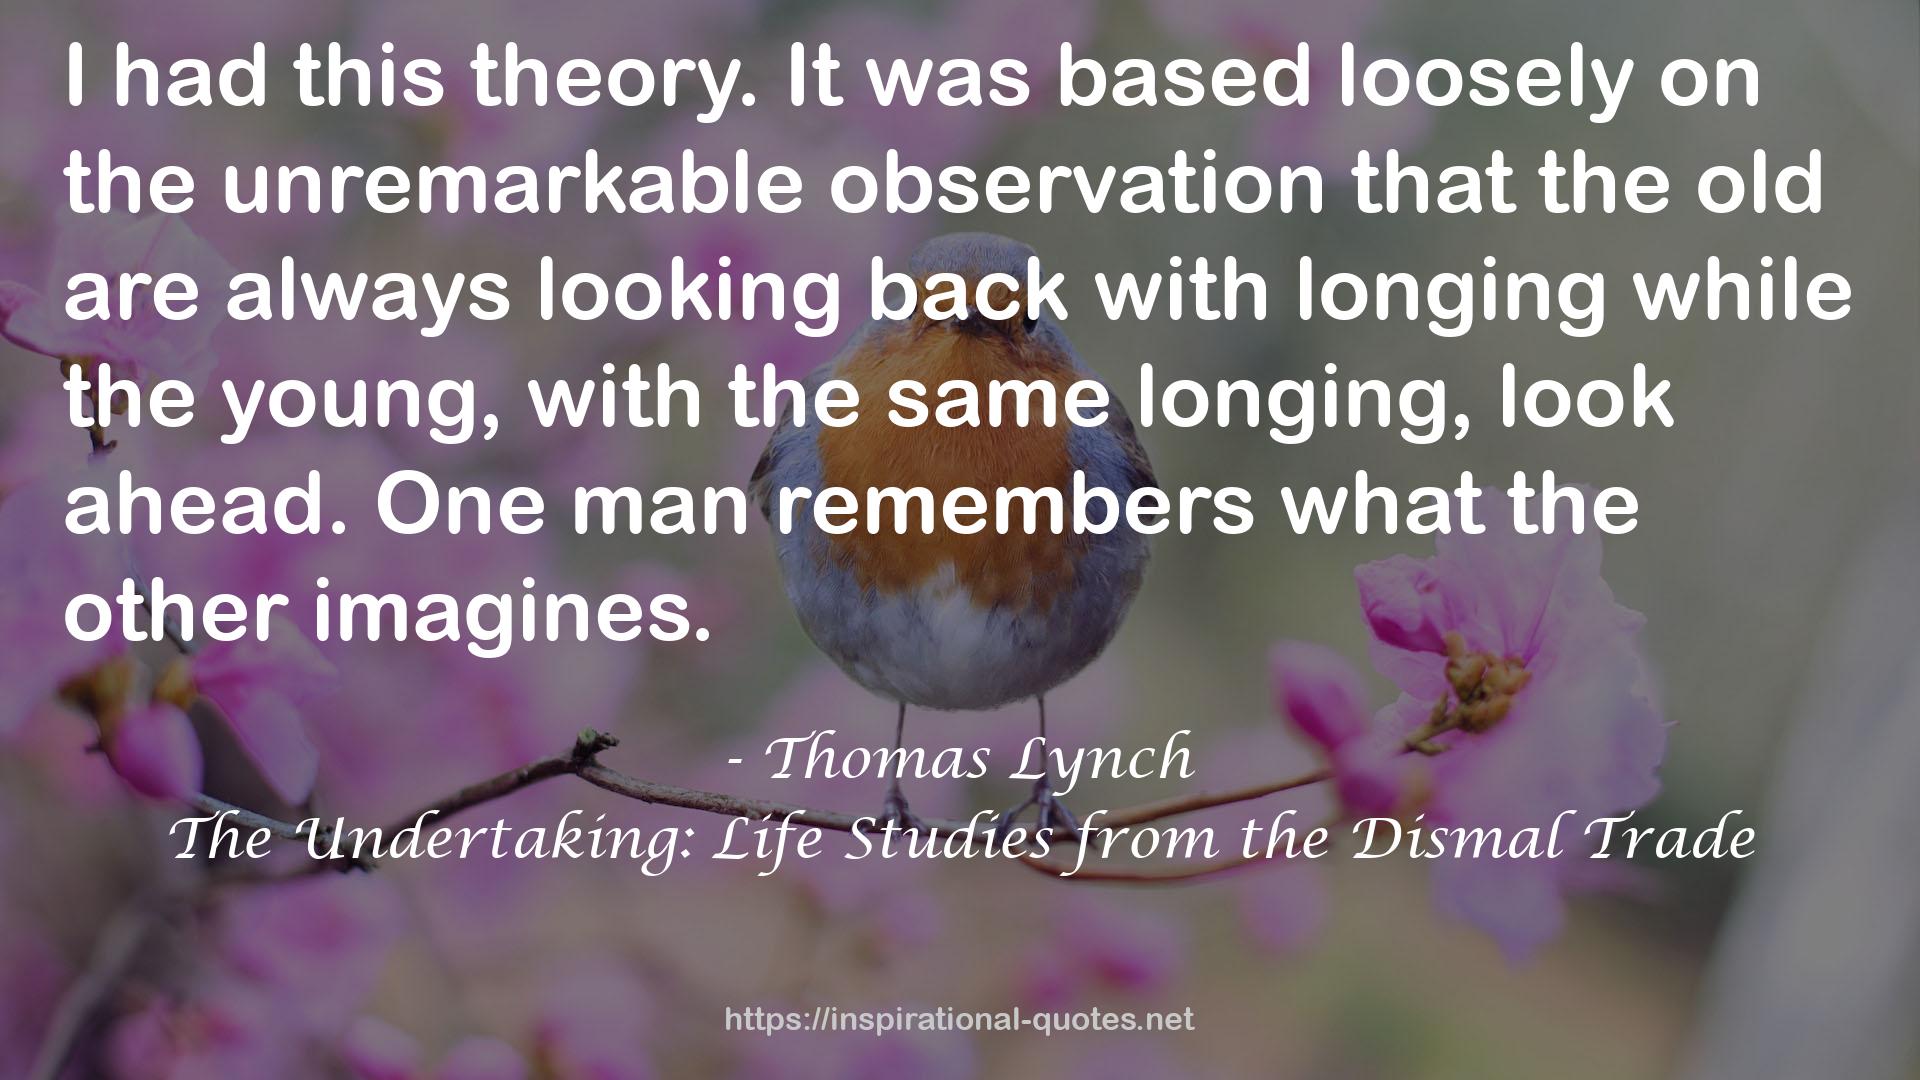 The Undertaking: Life Studies from the Dismal Trade QUOTES